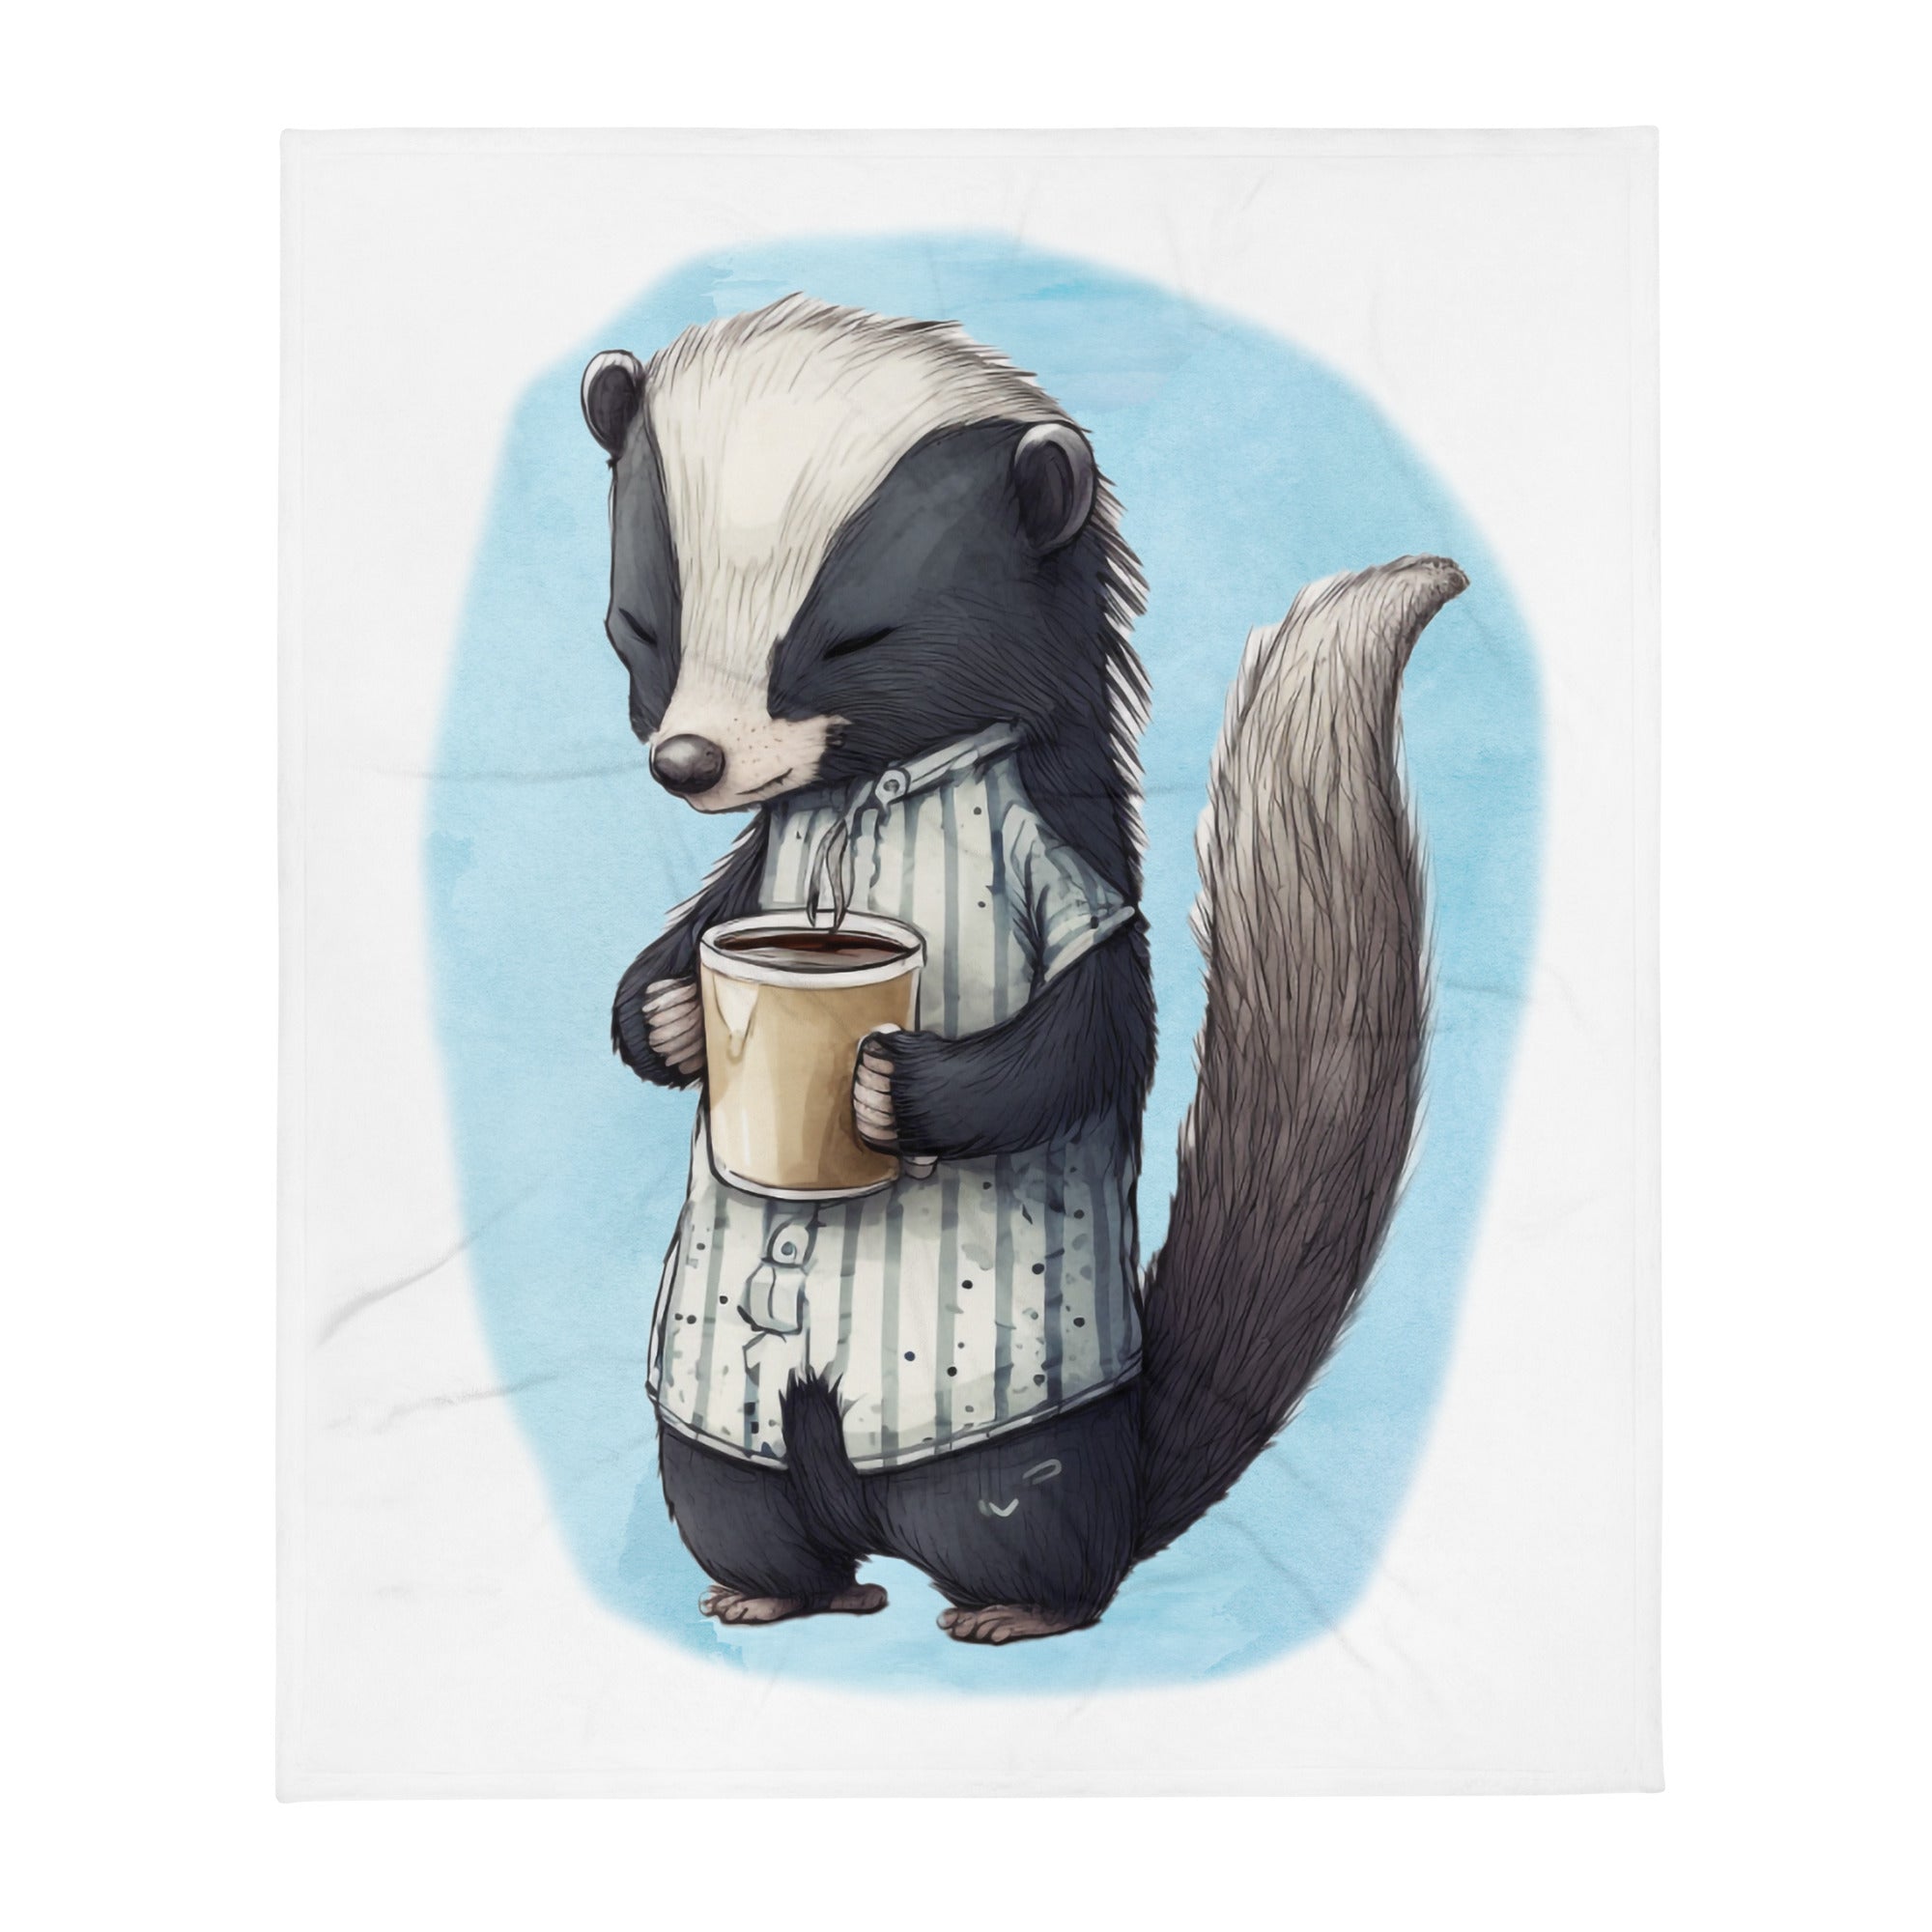 Sleepy Skunk 100% Polyester Soft Silk Touch Fabric Throw Blanket - Cozy, Durable and Adorable